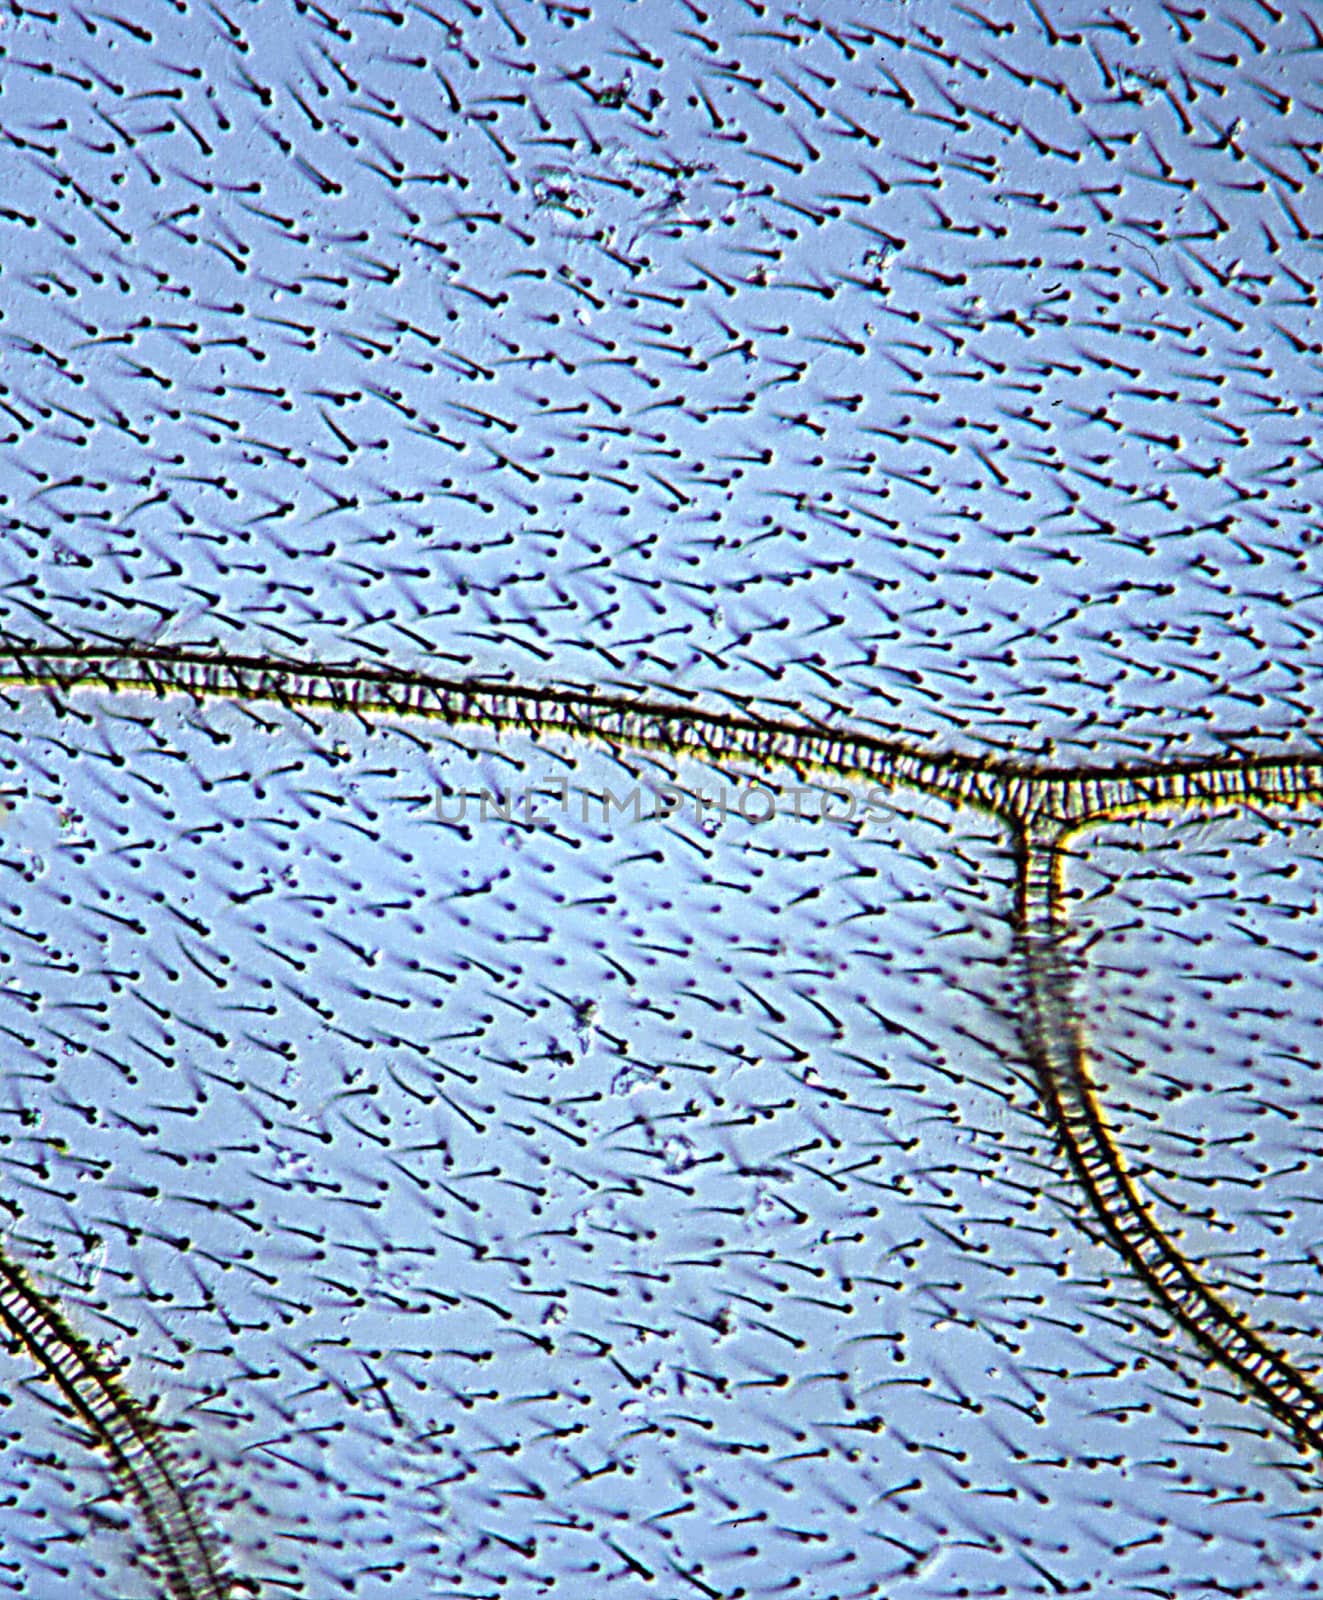 Wasp wing with veins